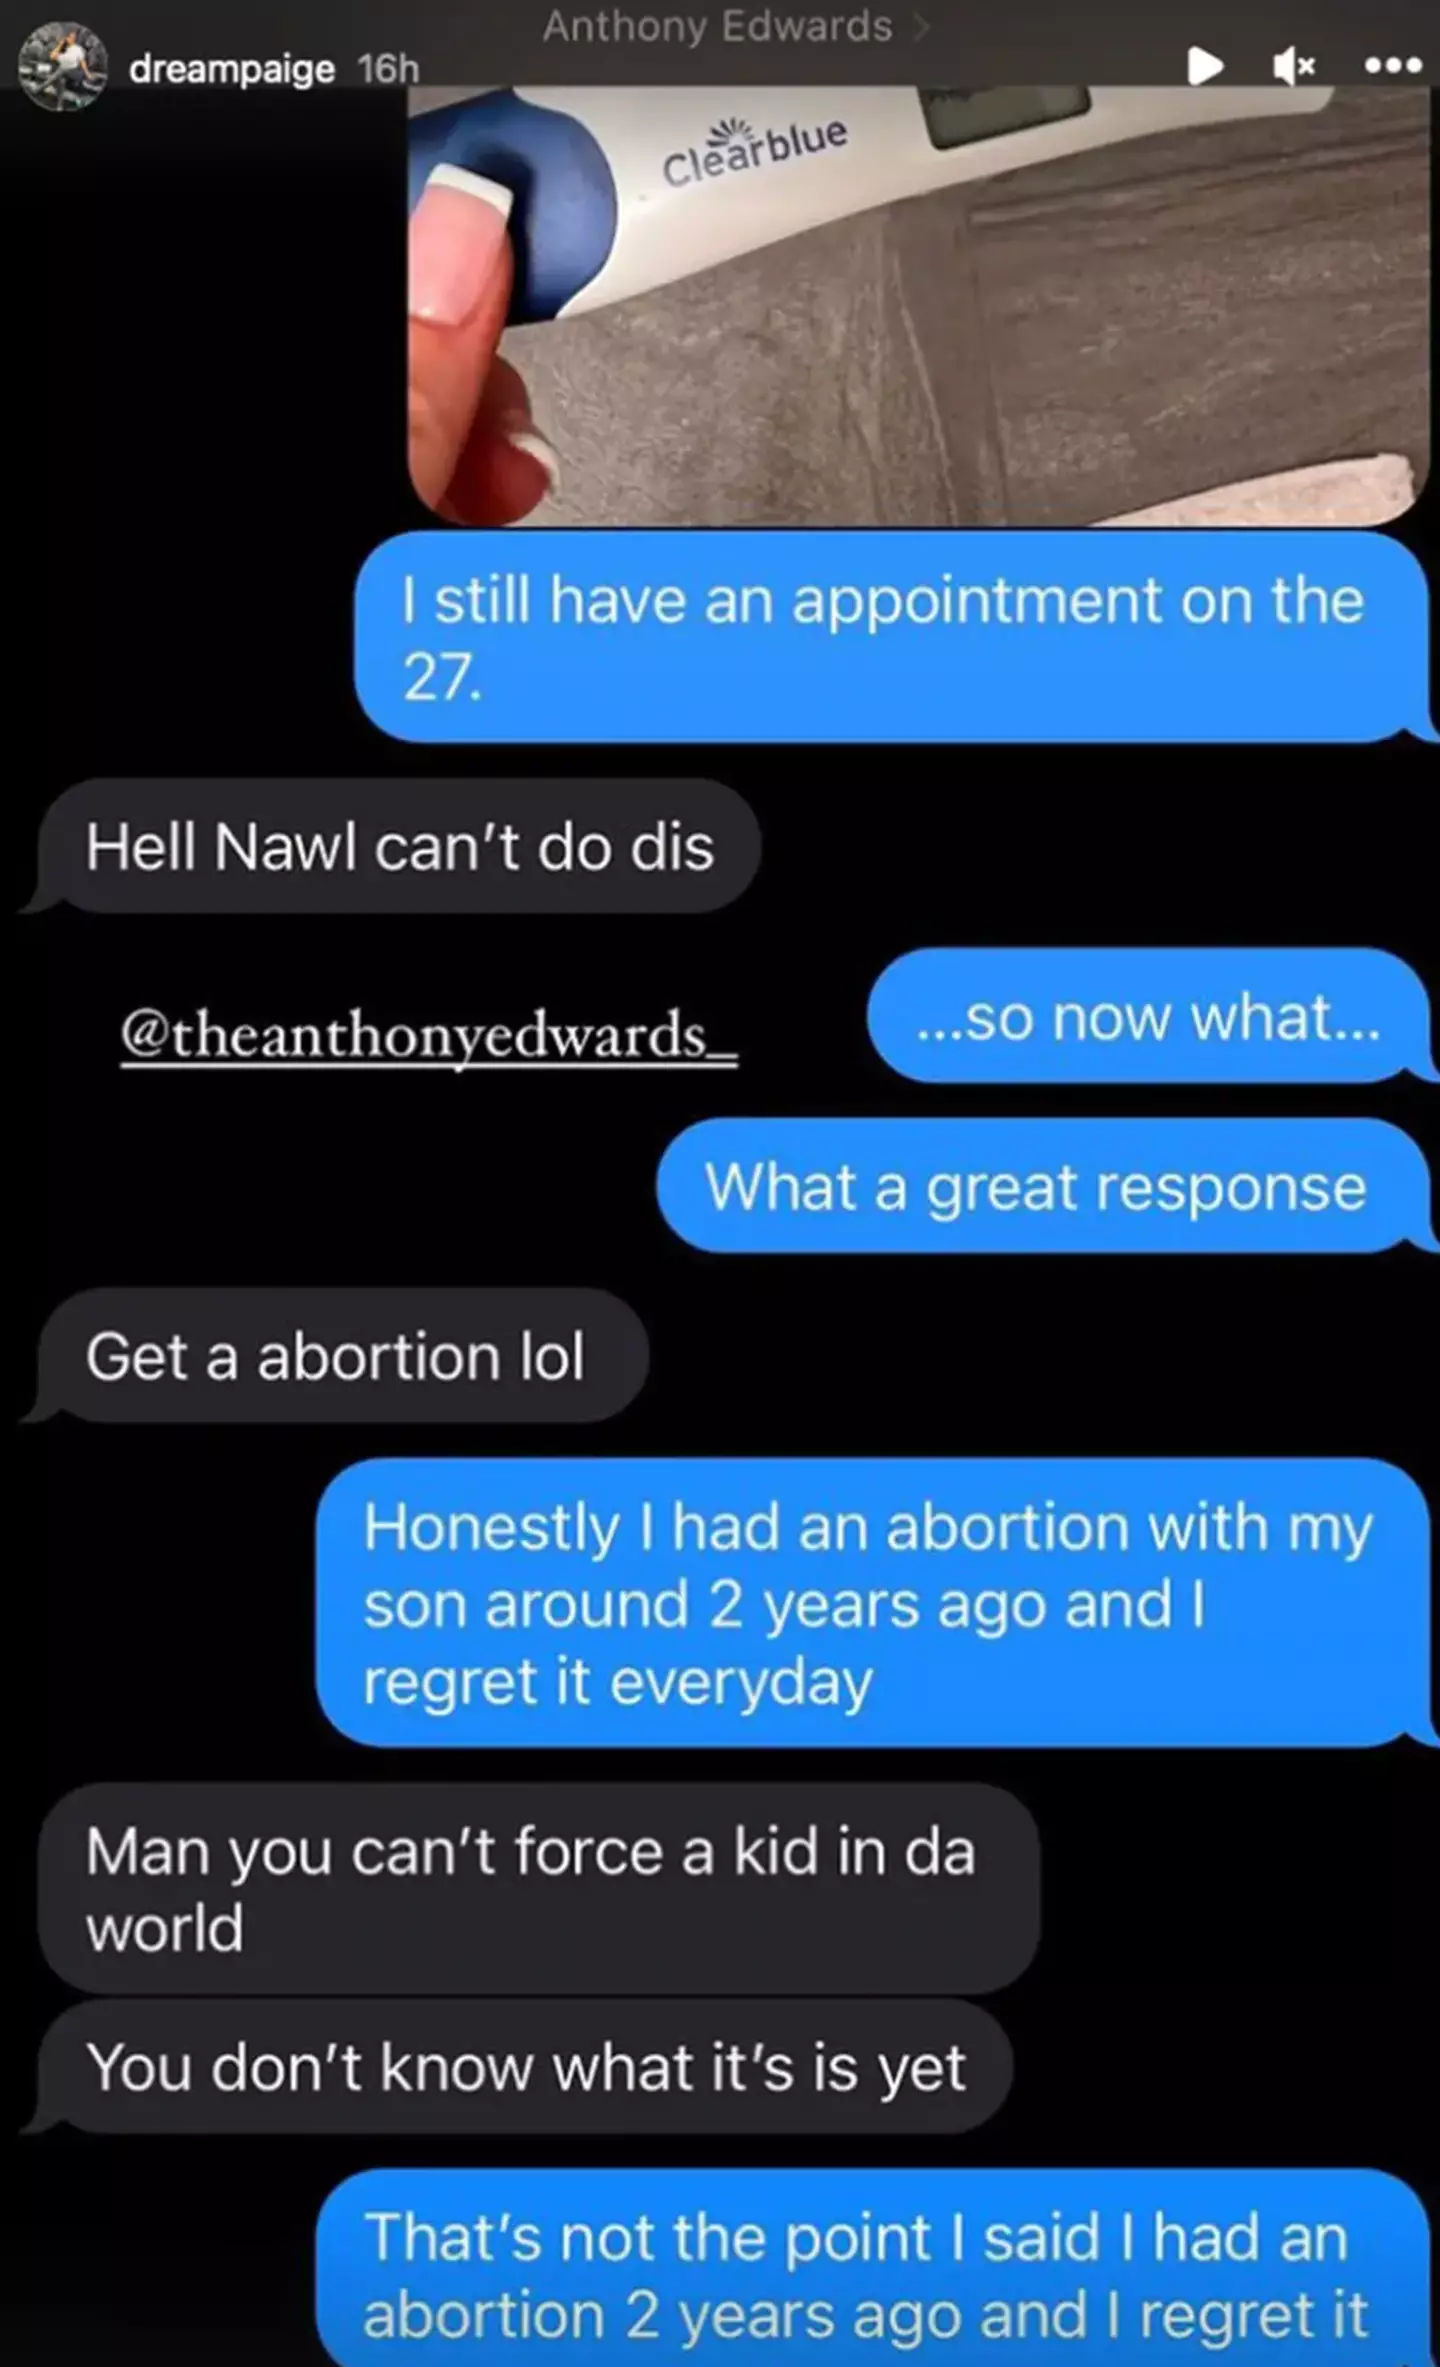 Model Paige Jordae shared screenshots of a text message conversation with Edwards regarding her pregnancy.